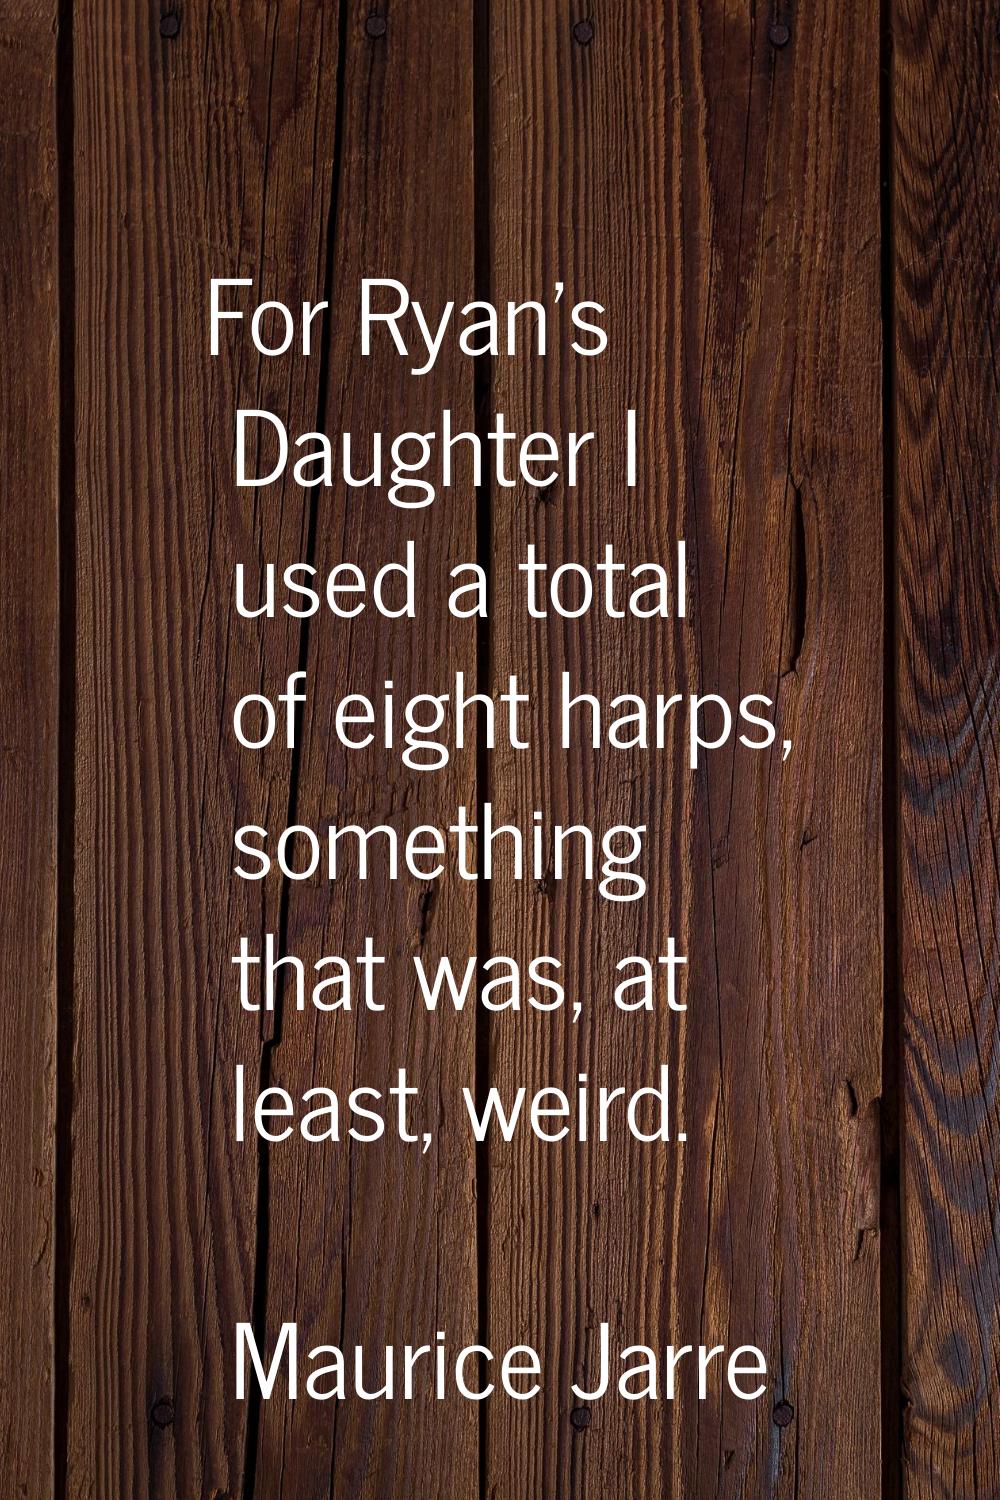 For Ryan's Daughter I used a total of eight harps, something that was, at least, weird.